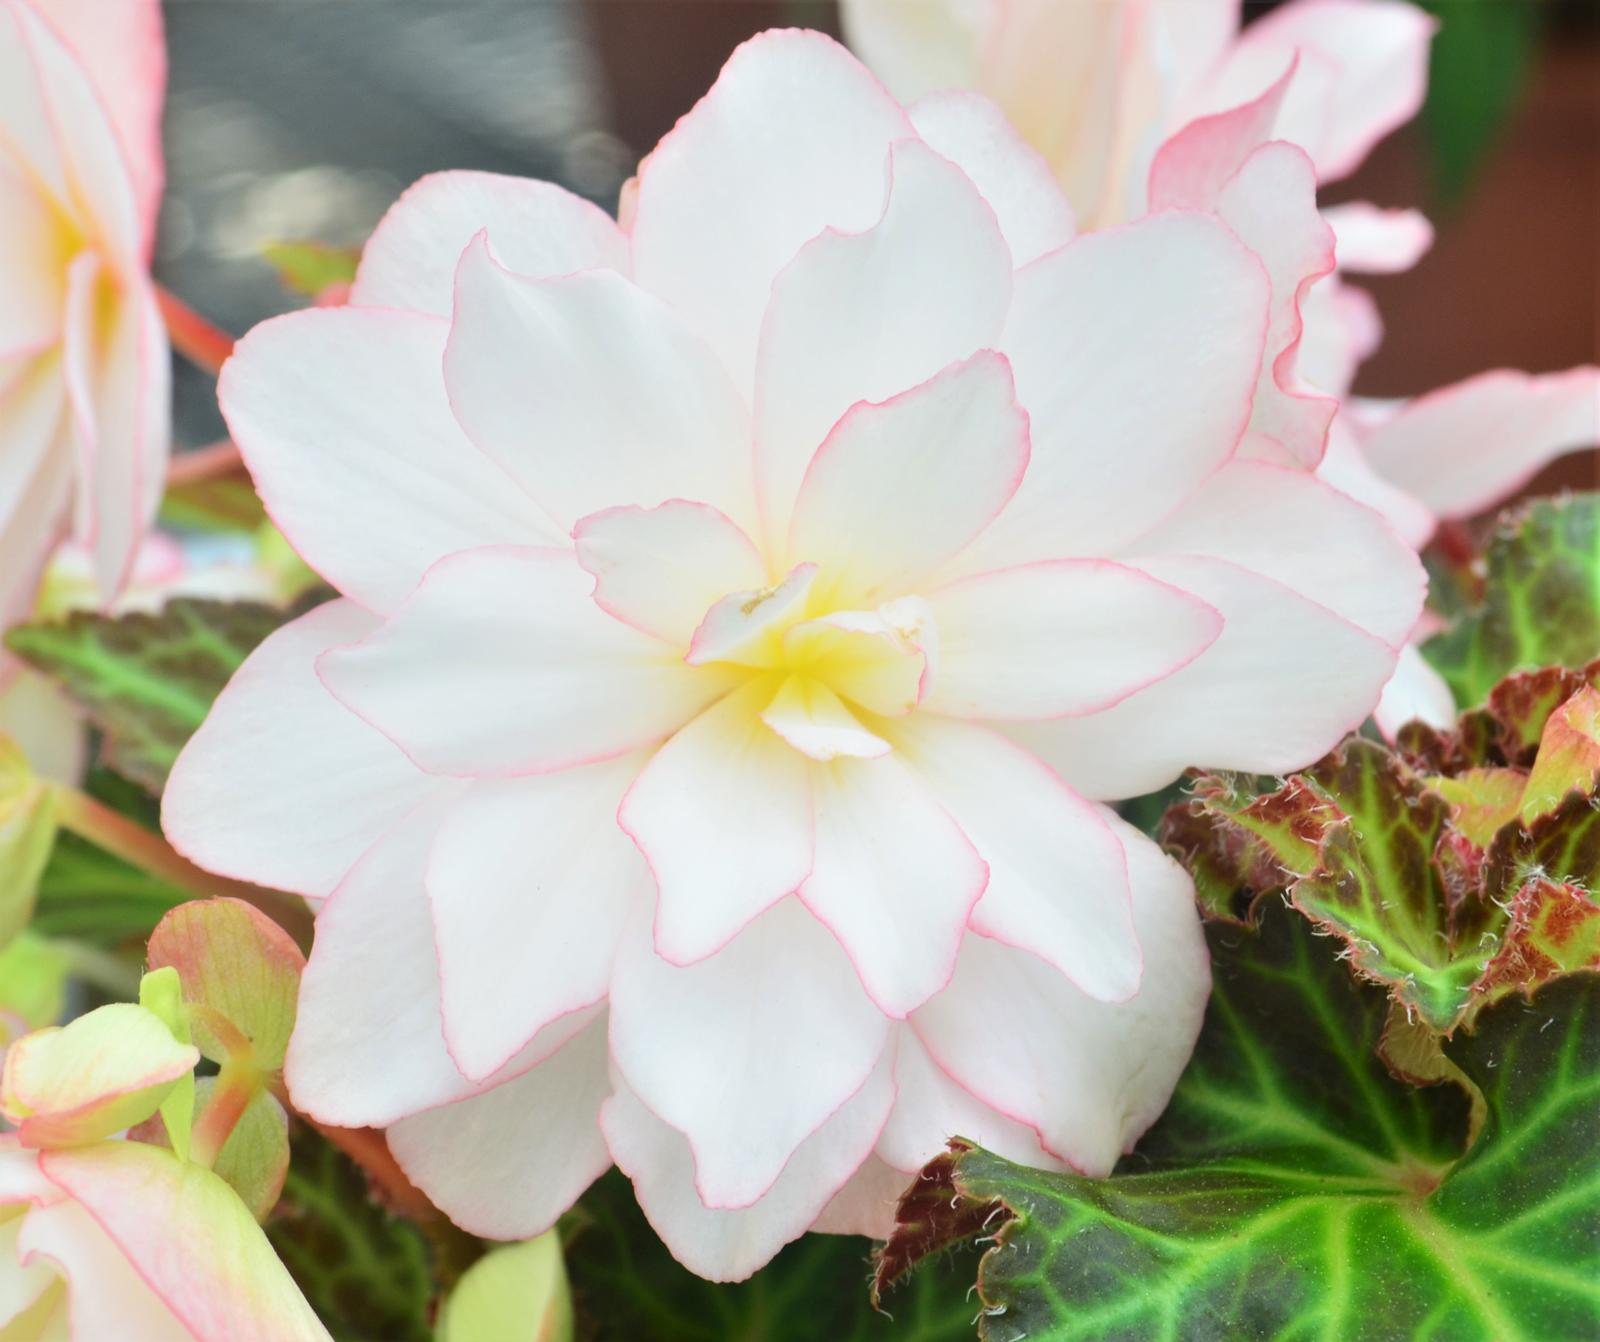 Begonia I'conia 'Miss Montreal' - Begonia from Hillcrest Nursery